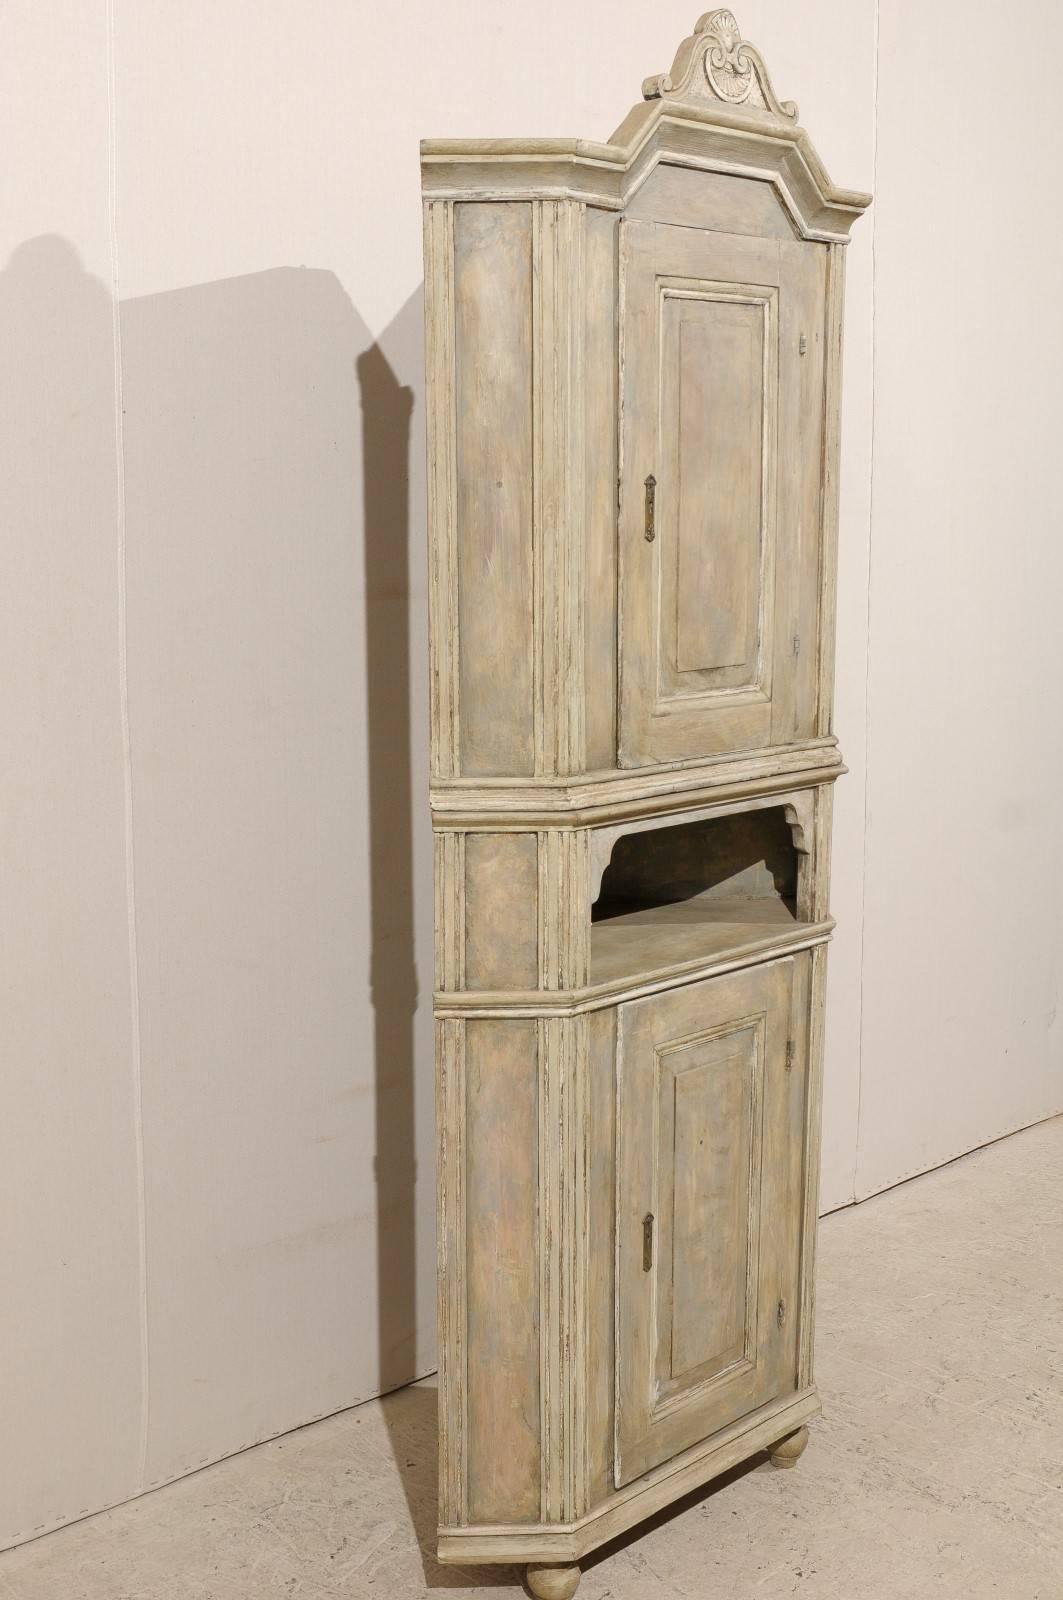 Wood Swedish Early 19th C. Painted 2-Door Corner Cabinet with Carved Pediment Bonnet